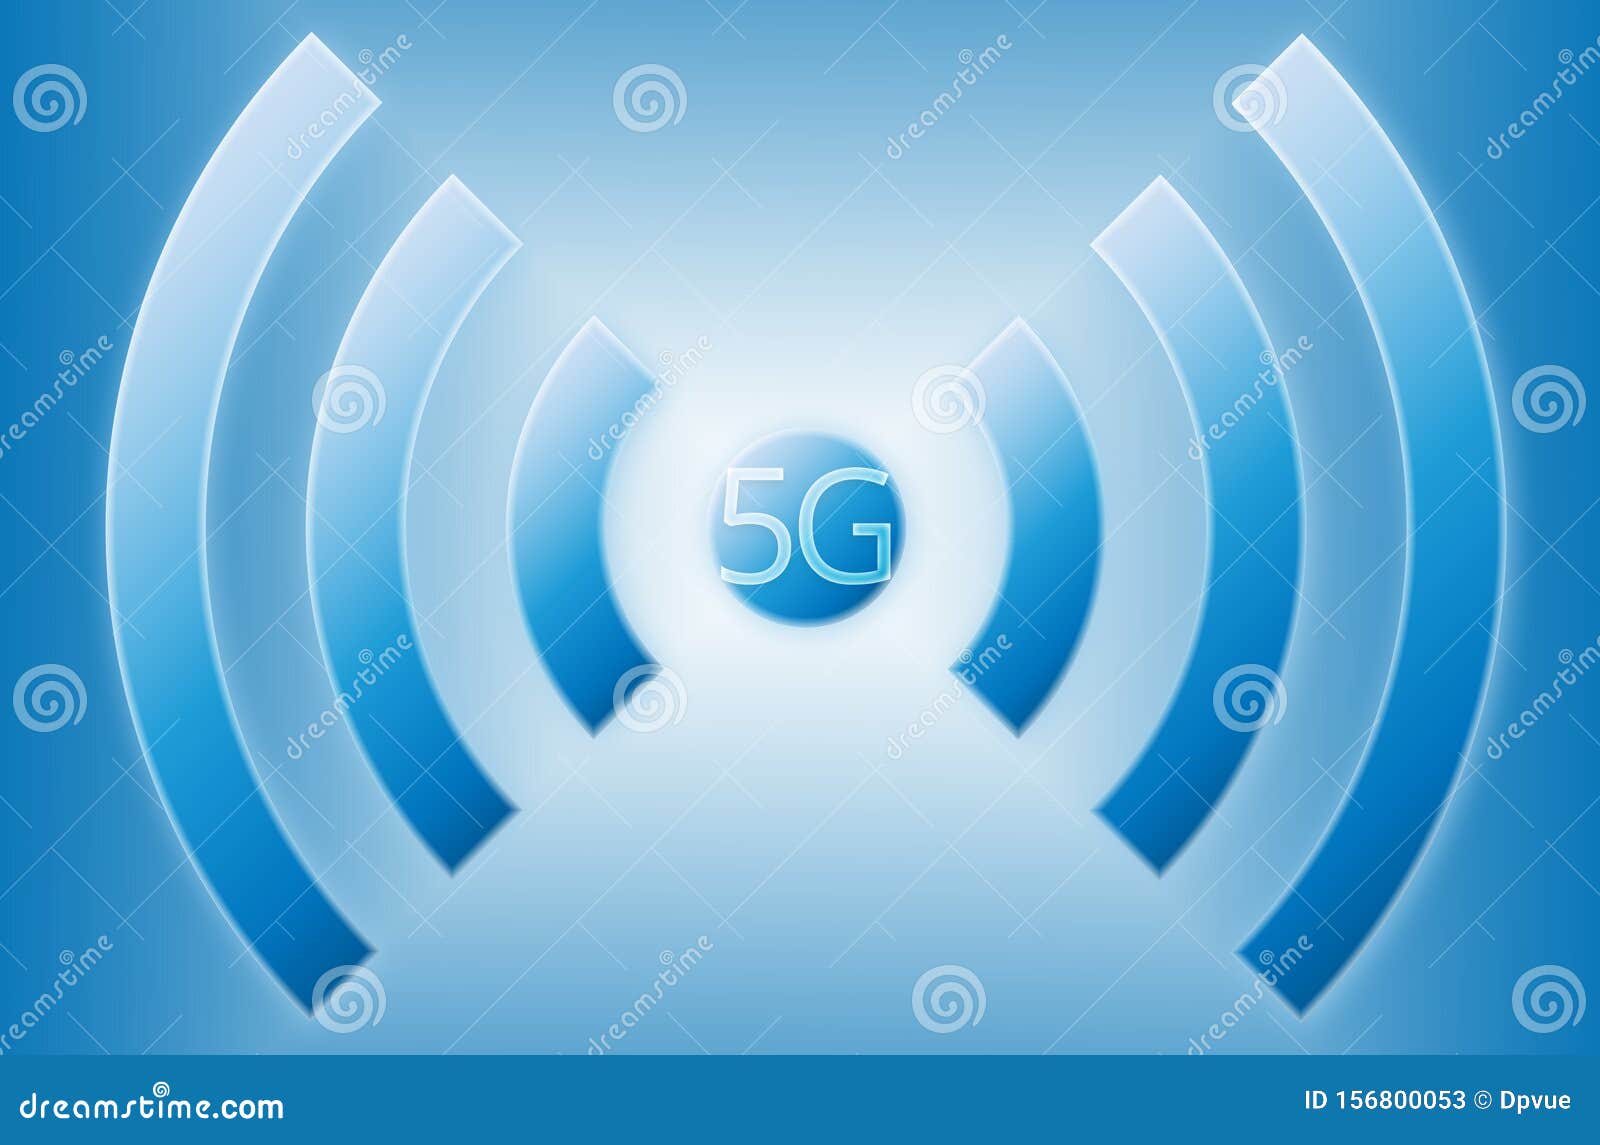 5g Wireless Connection - Digital Signal Transmission Of ...